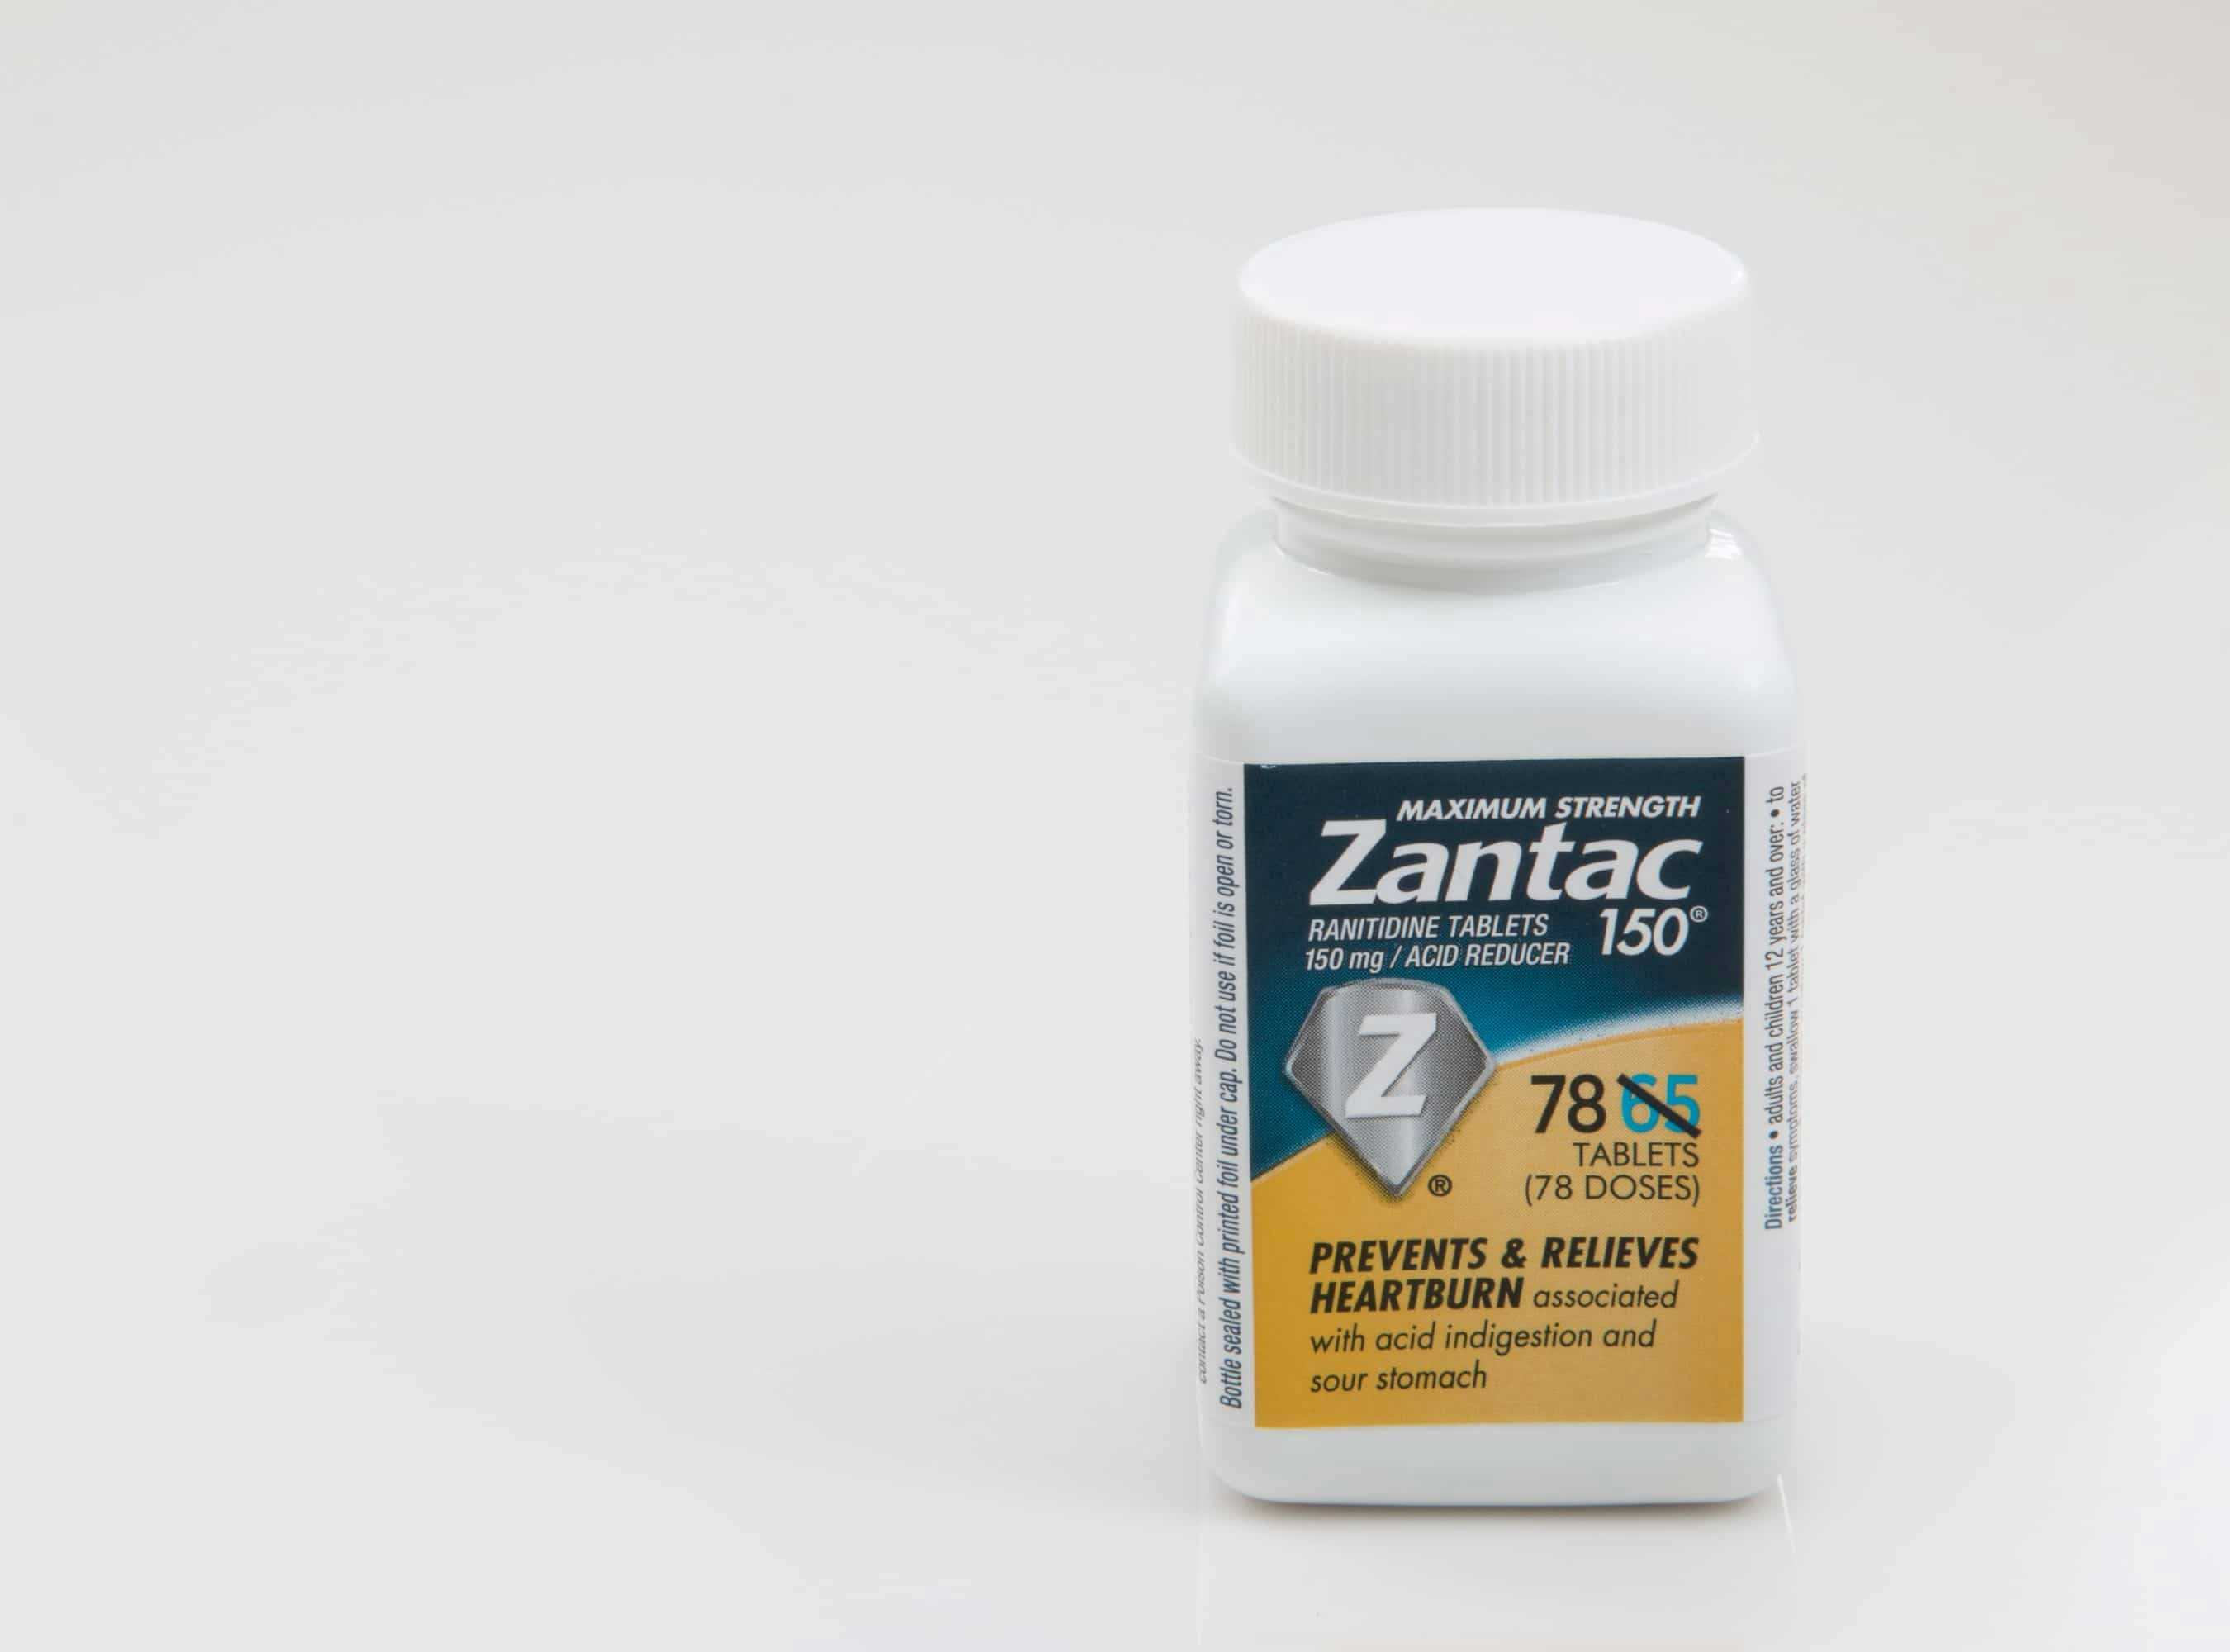 Zantac Recall Triggers Wave of Class Action Preparations